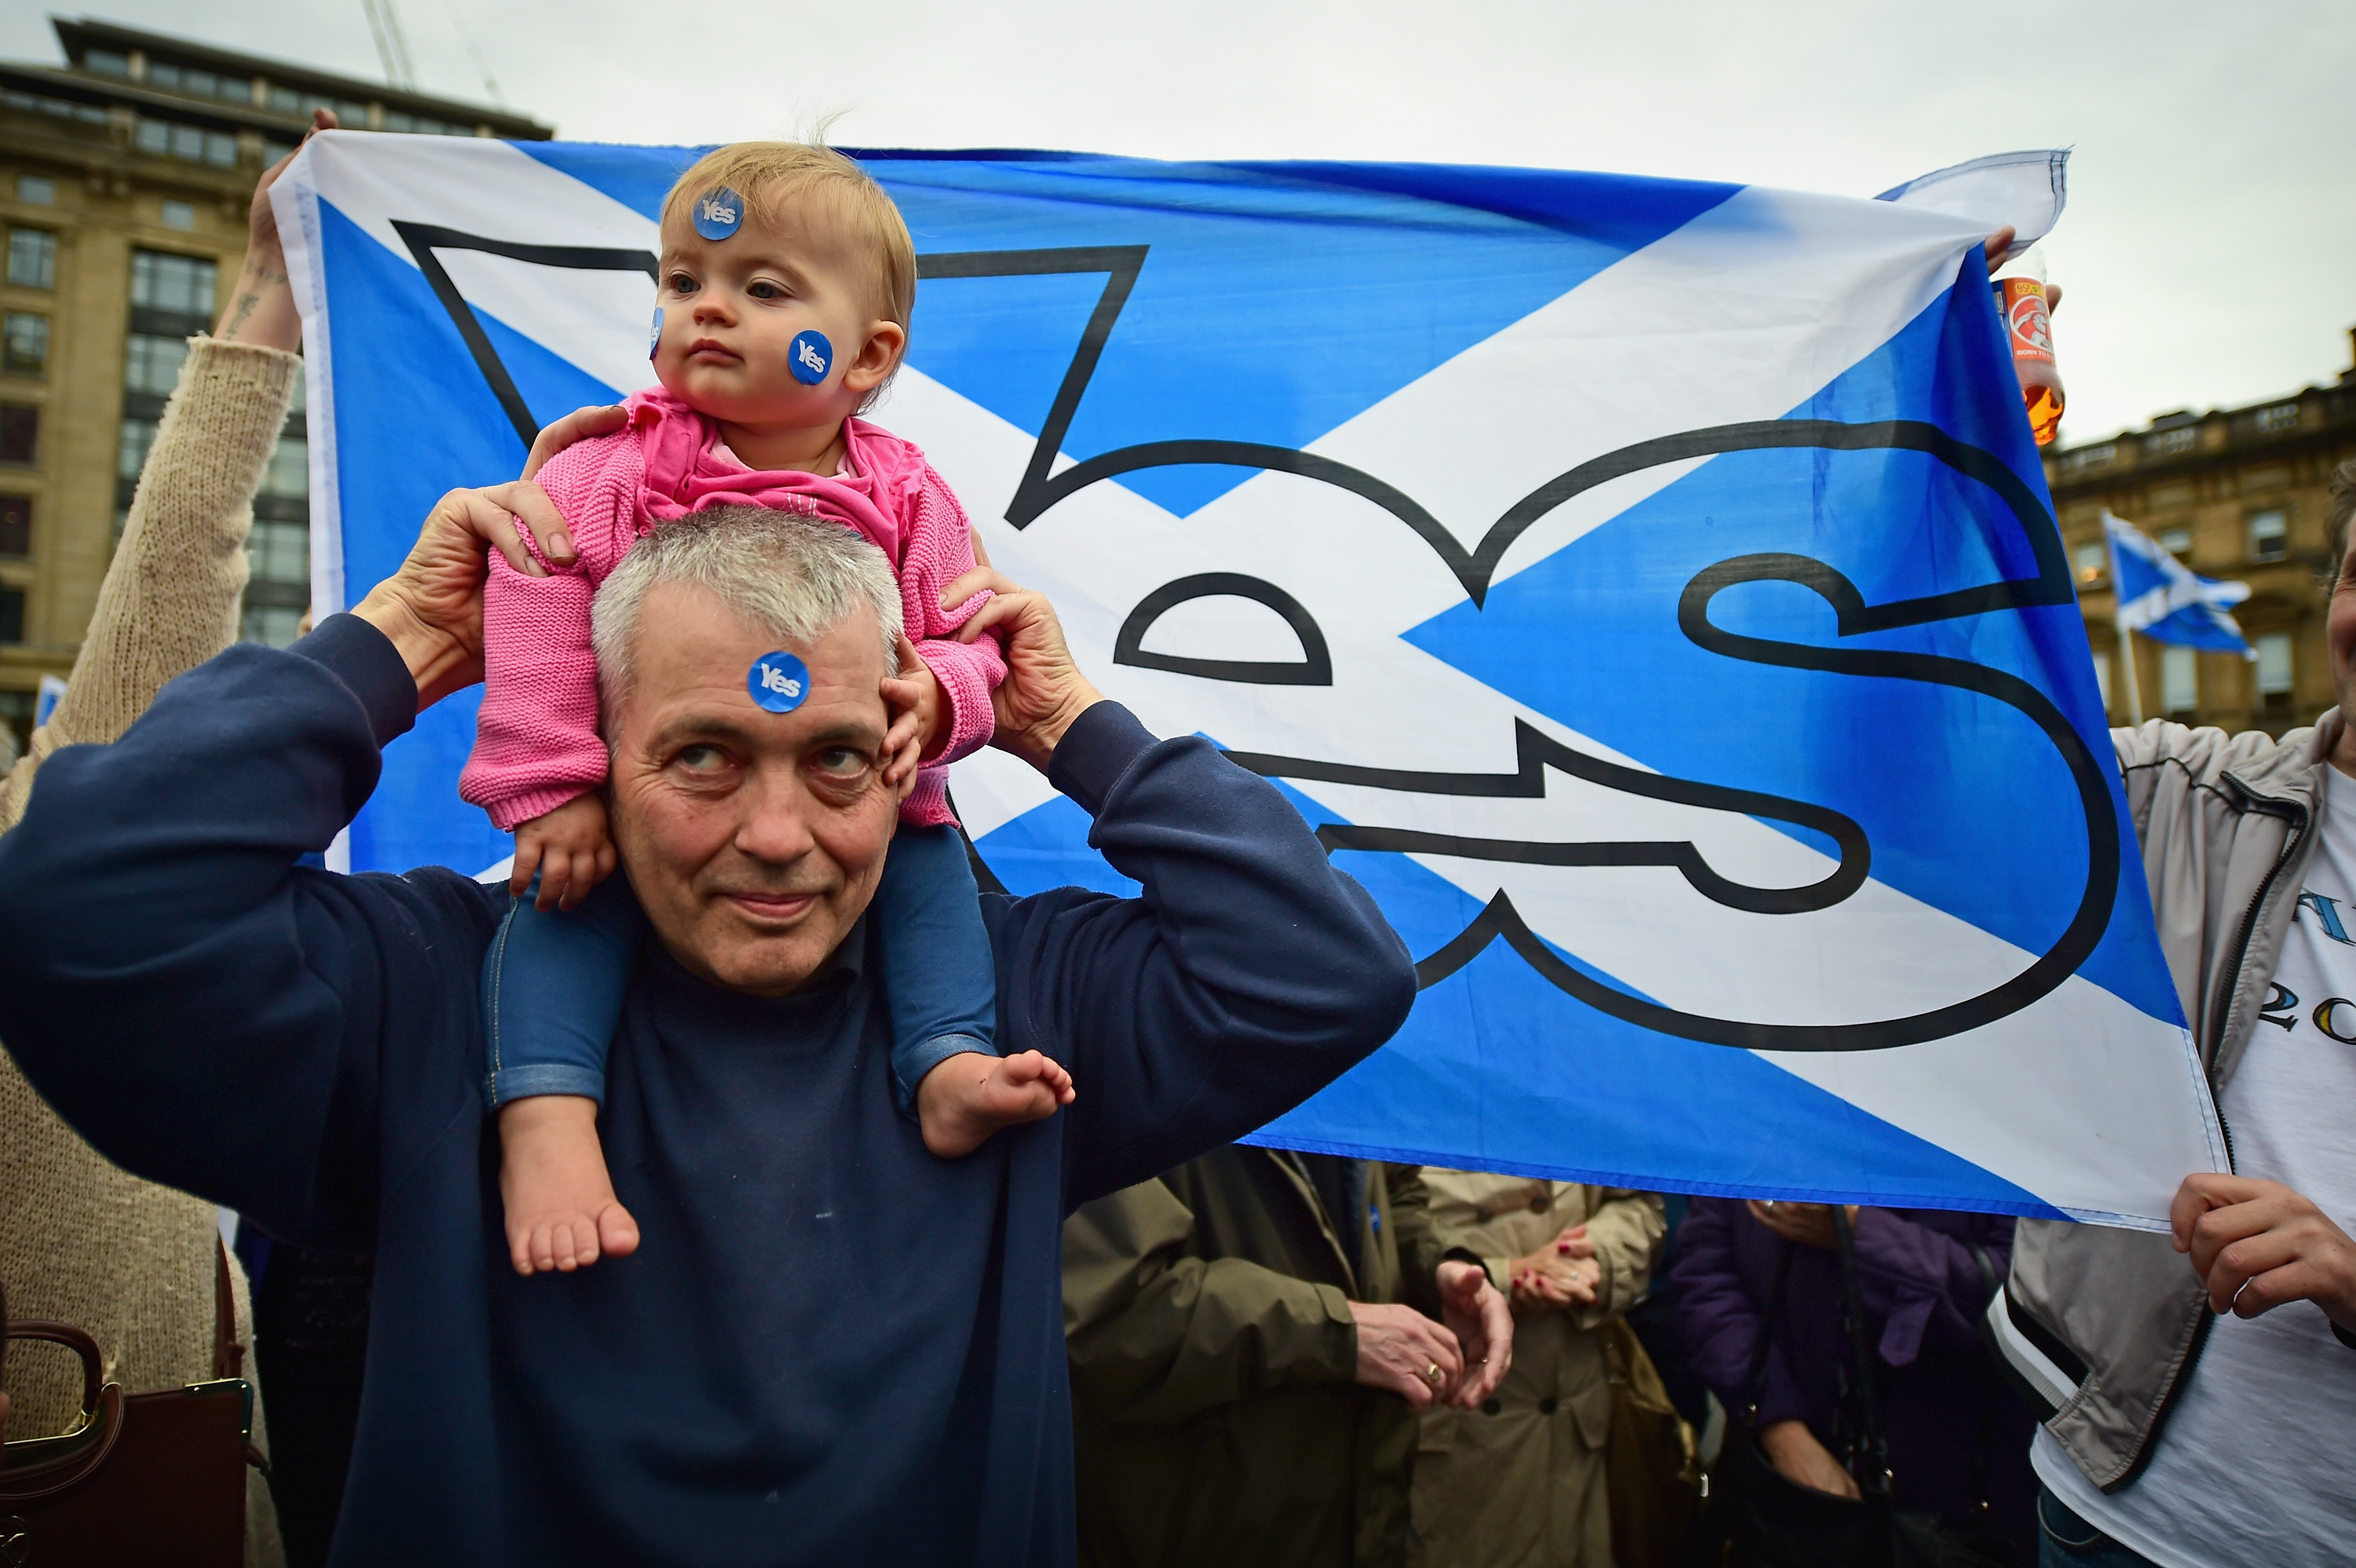 The EU referendum result has seen more people favour Scottish independence.